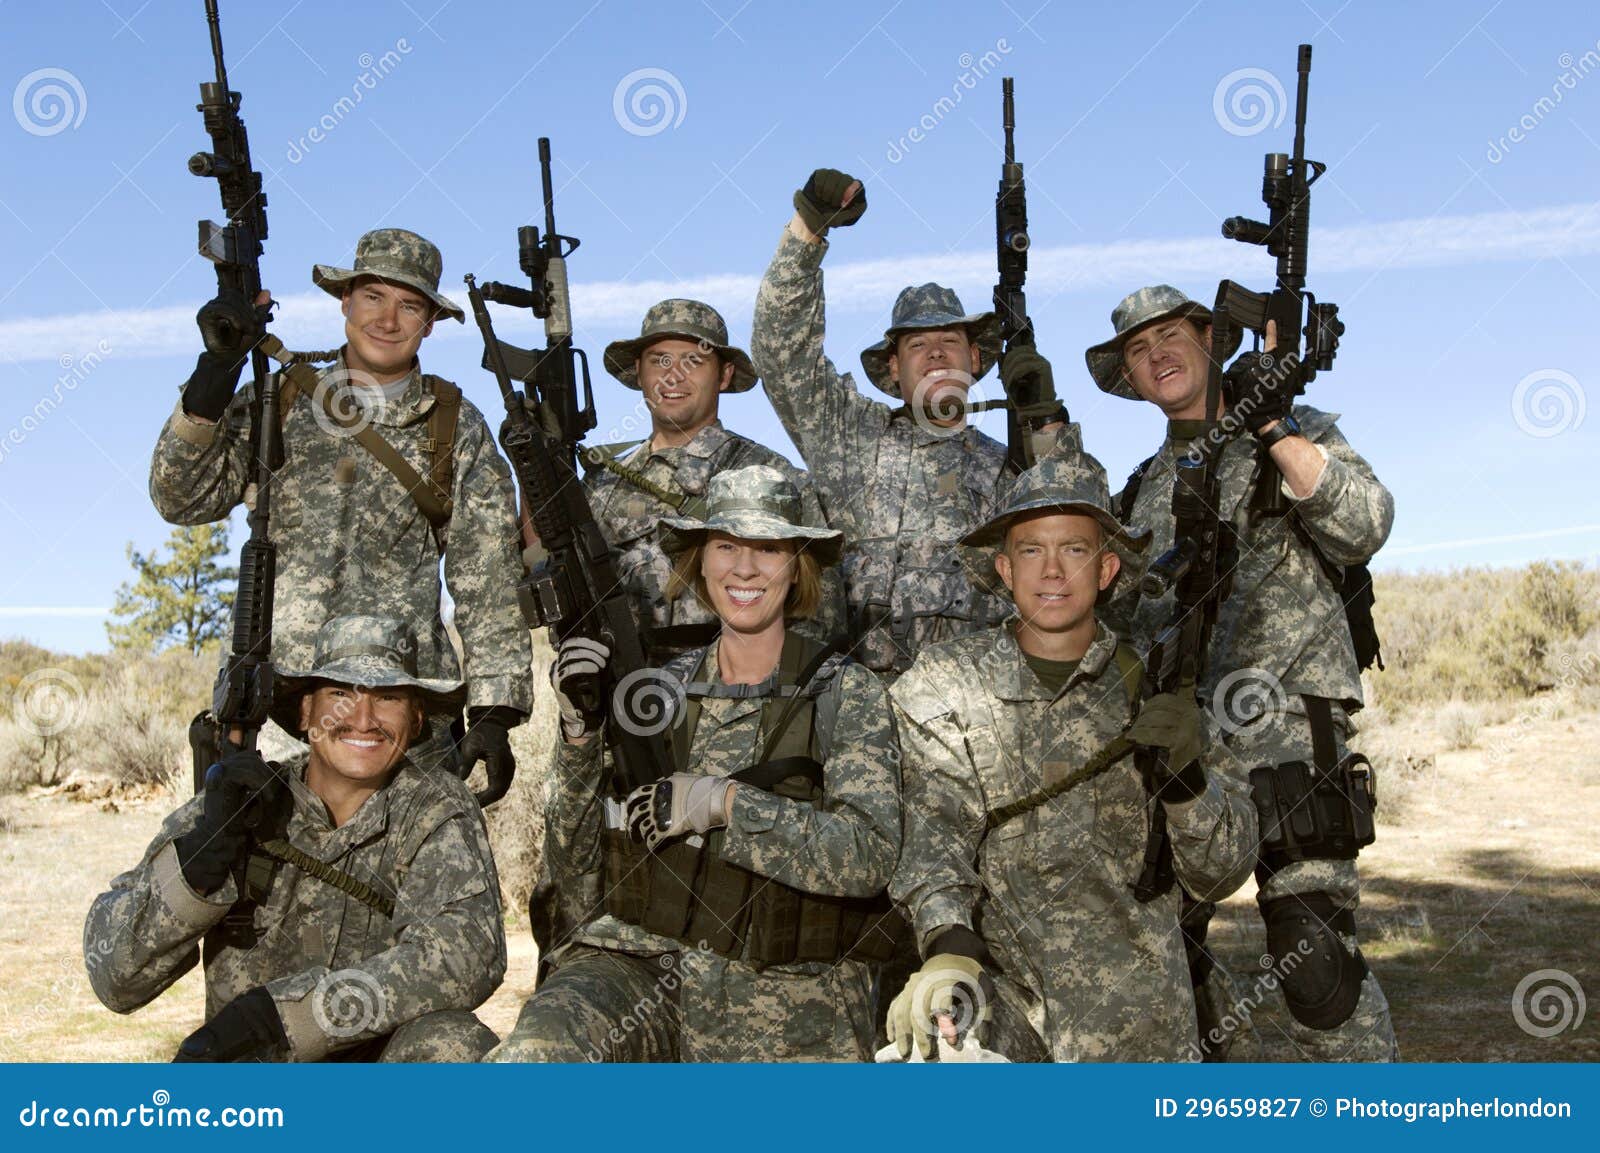 A Group Of Soldiers 62